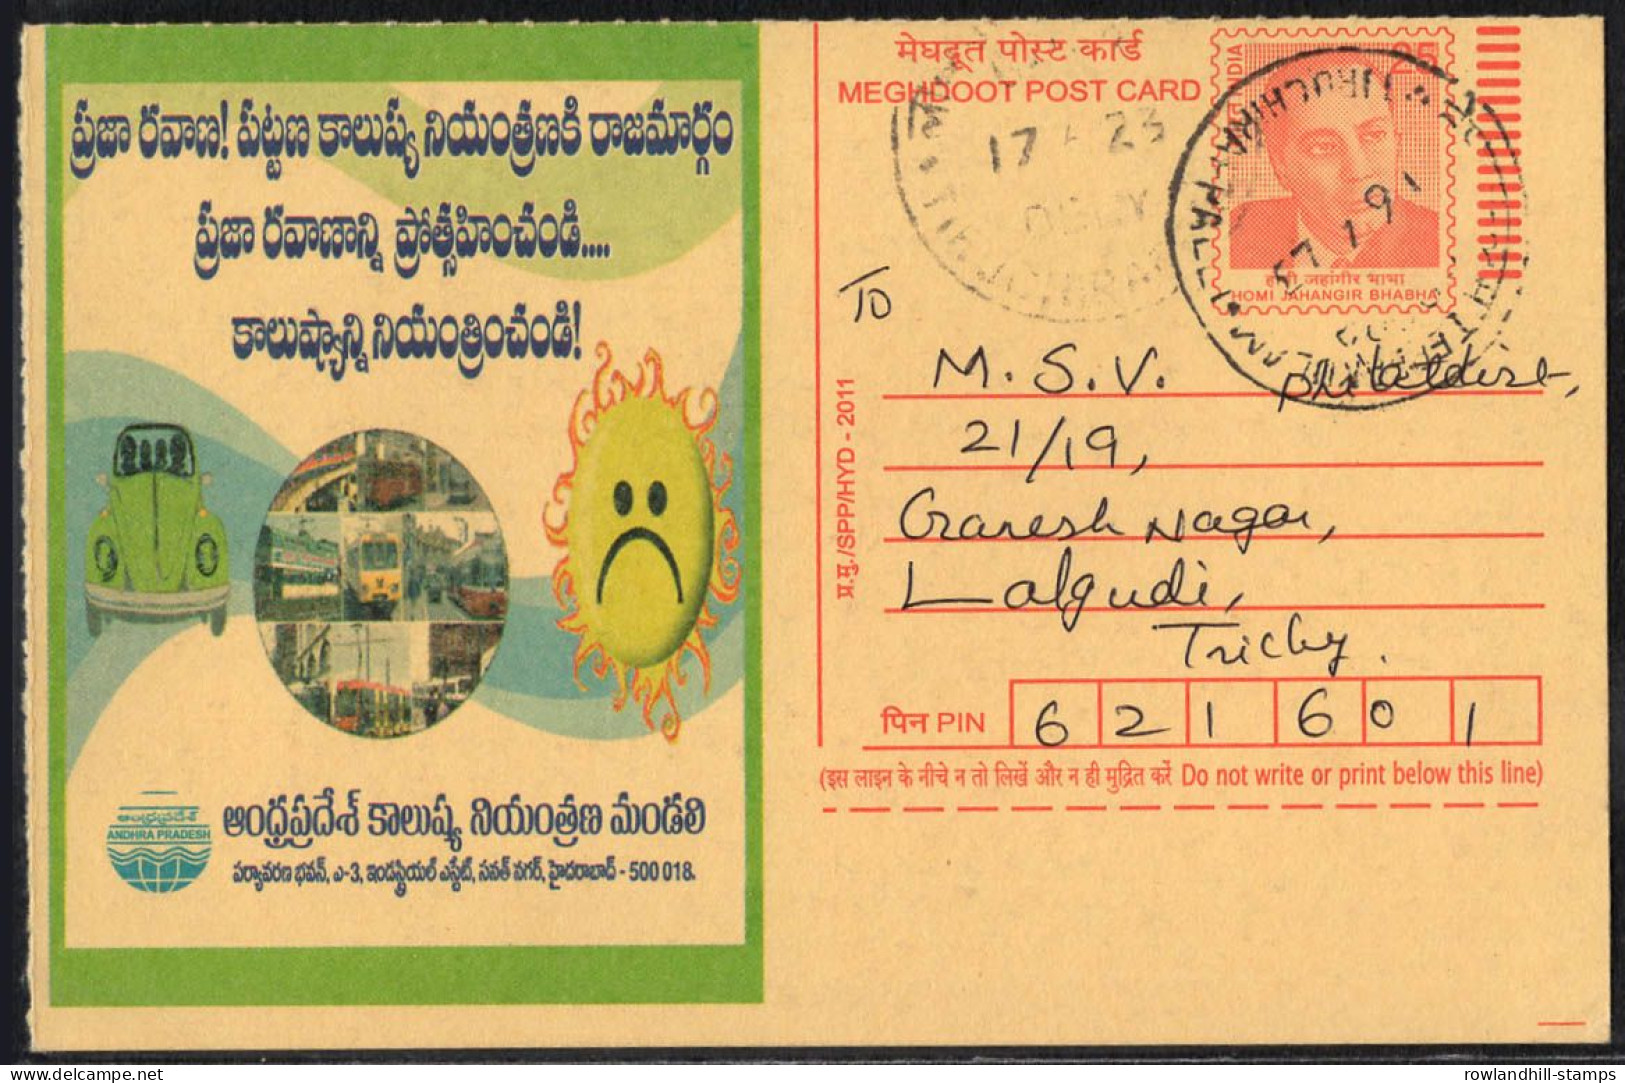 India, 2011, SAVE WATER, WATER CONSERVATION, Meghdoot Post Card, Used, Environment, Postcard, Energy, Sun, Andhra, B23 - Water